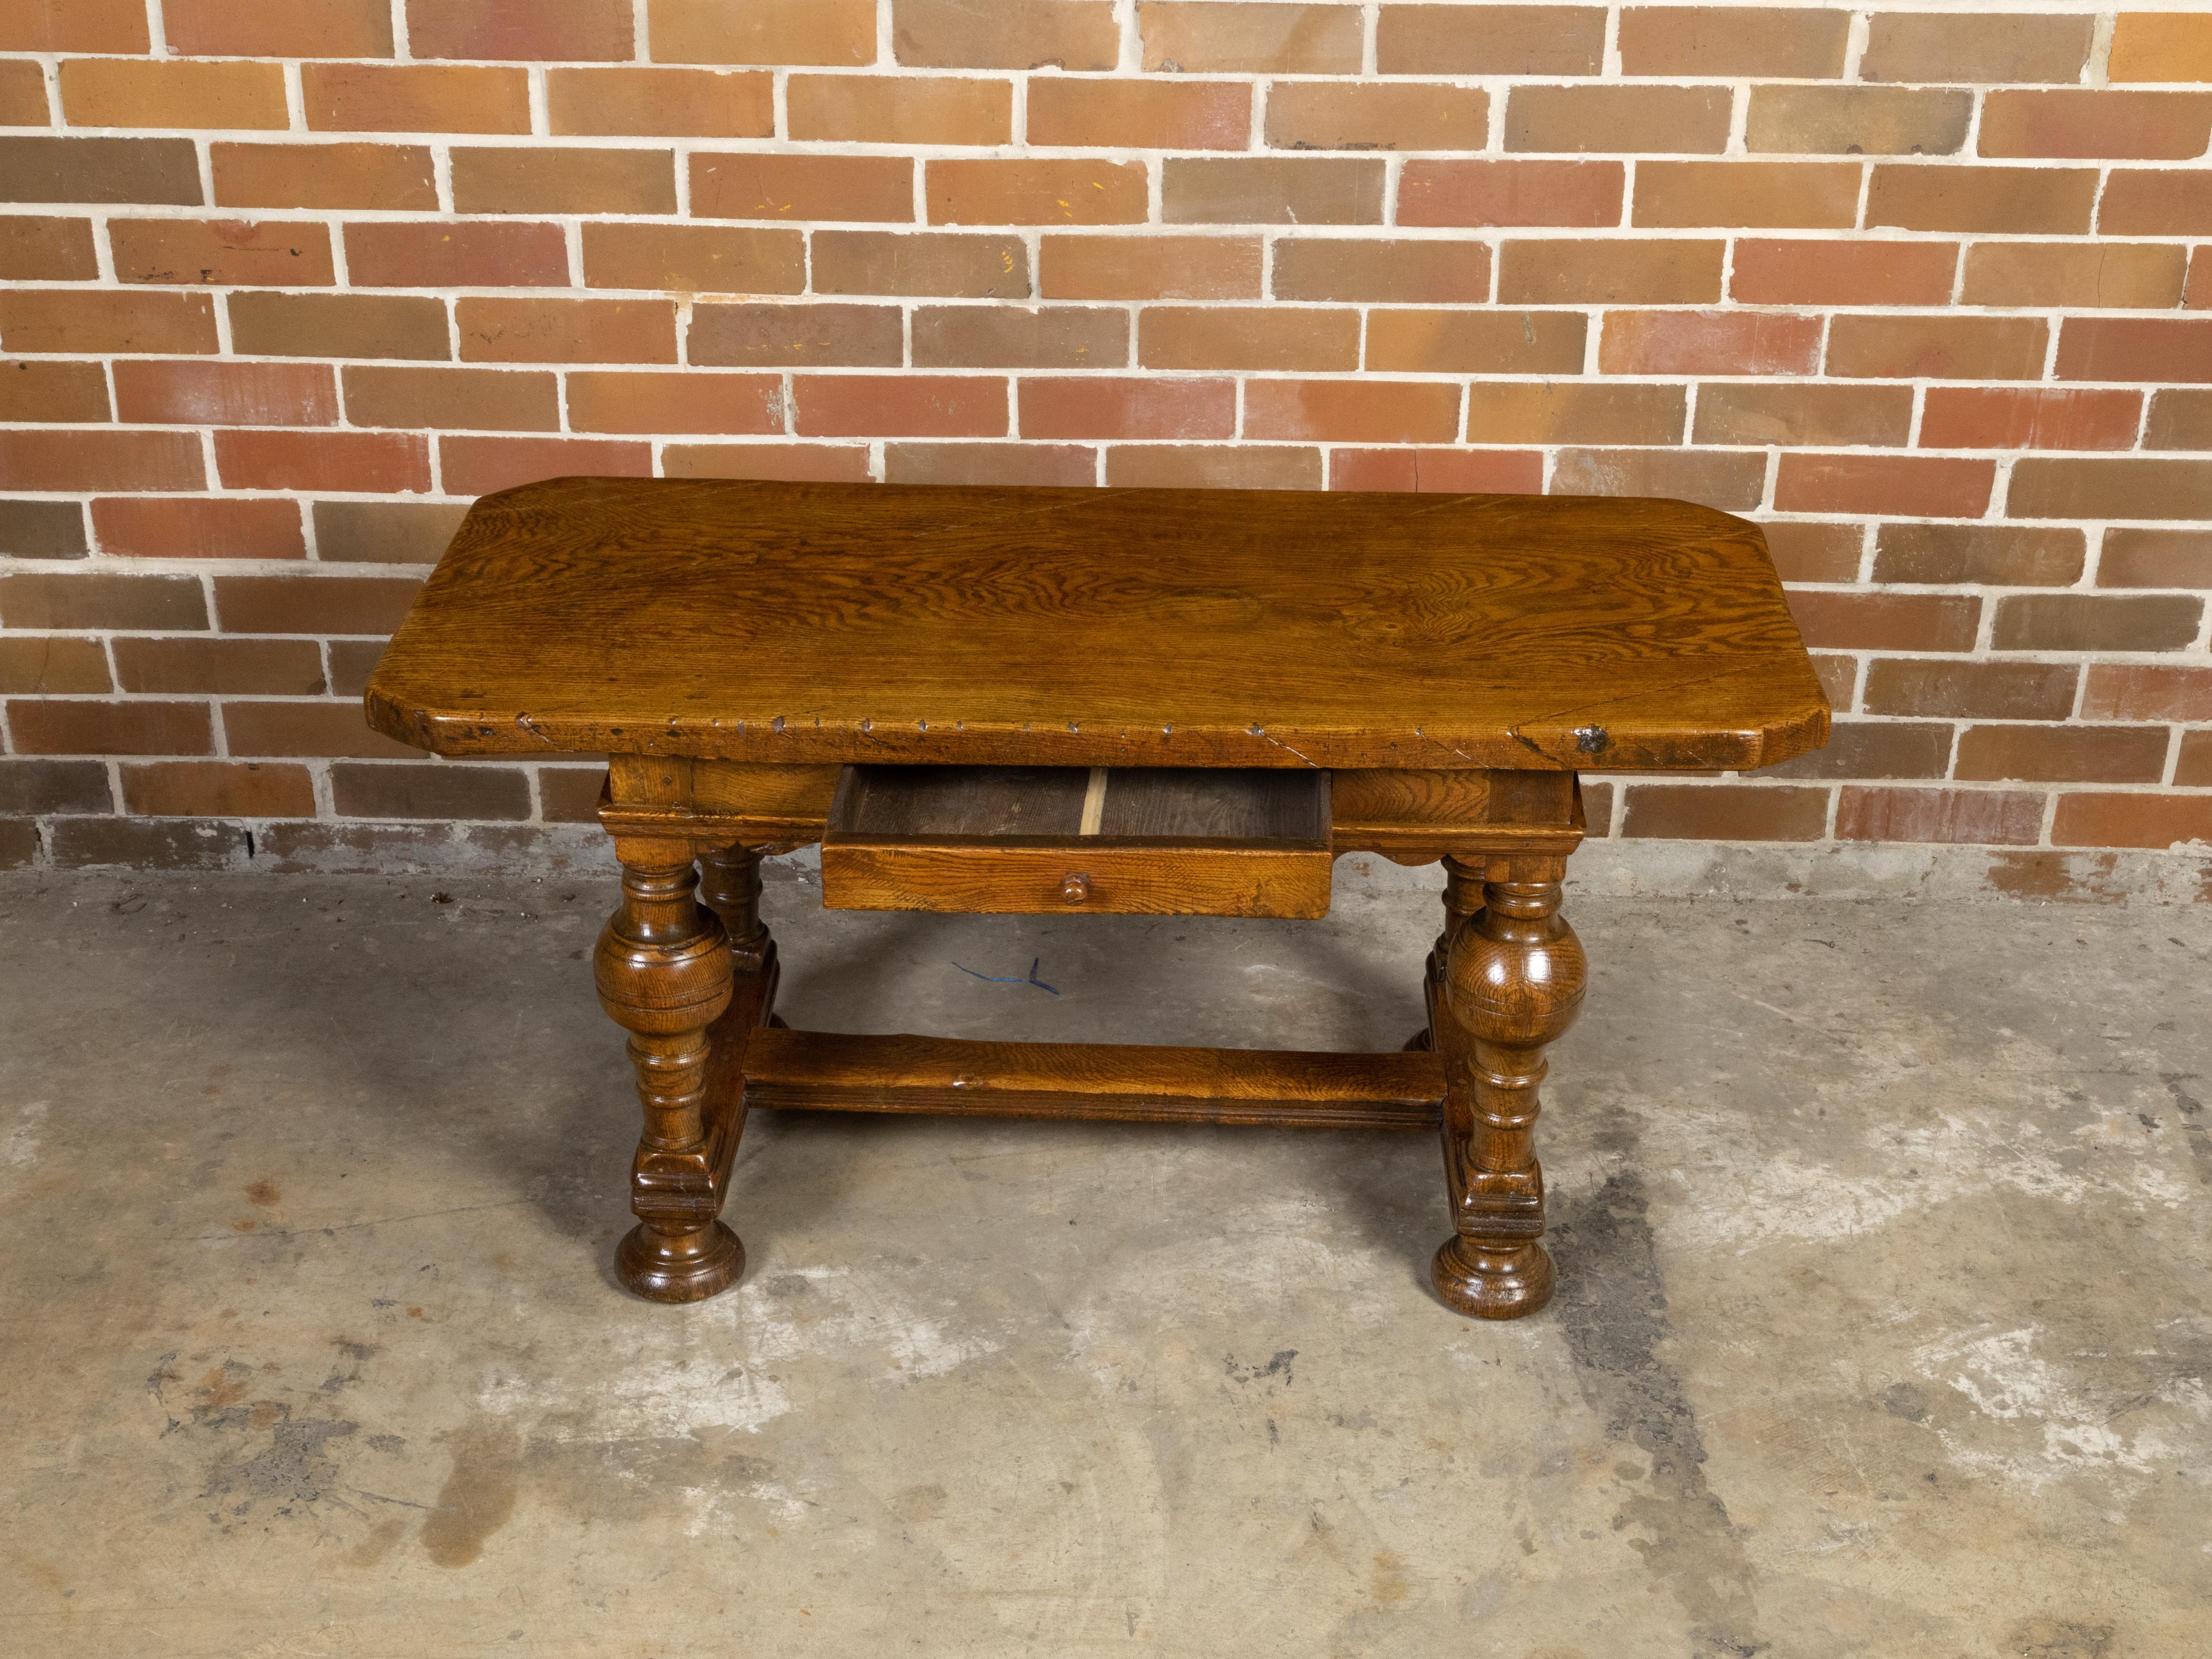 Danish Langeland Late 19th Century Oak Table with Carved Apron and Turned Legs For Sale 4